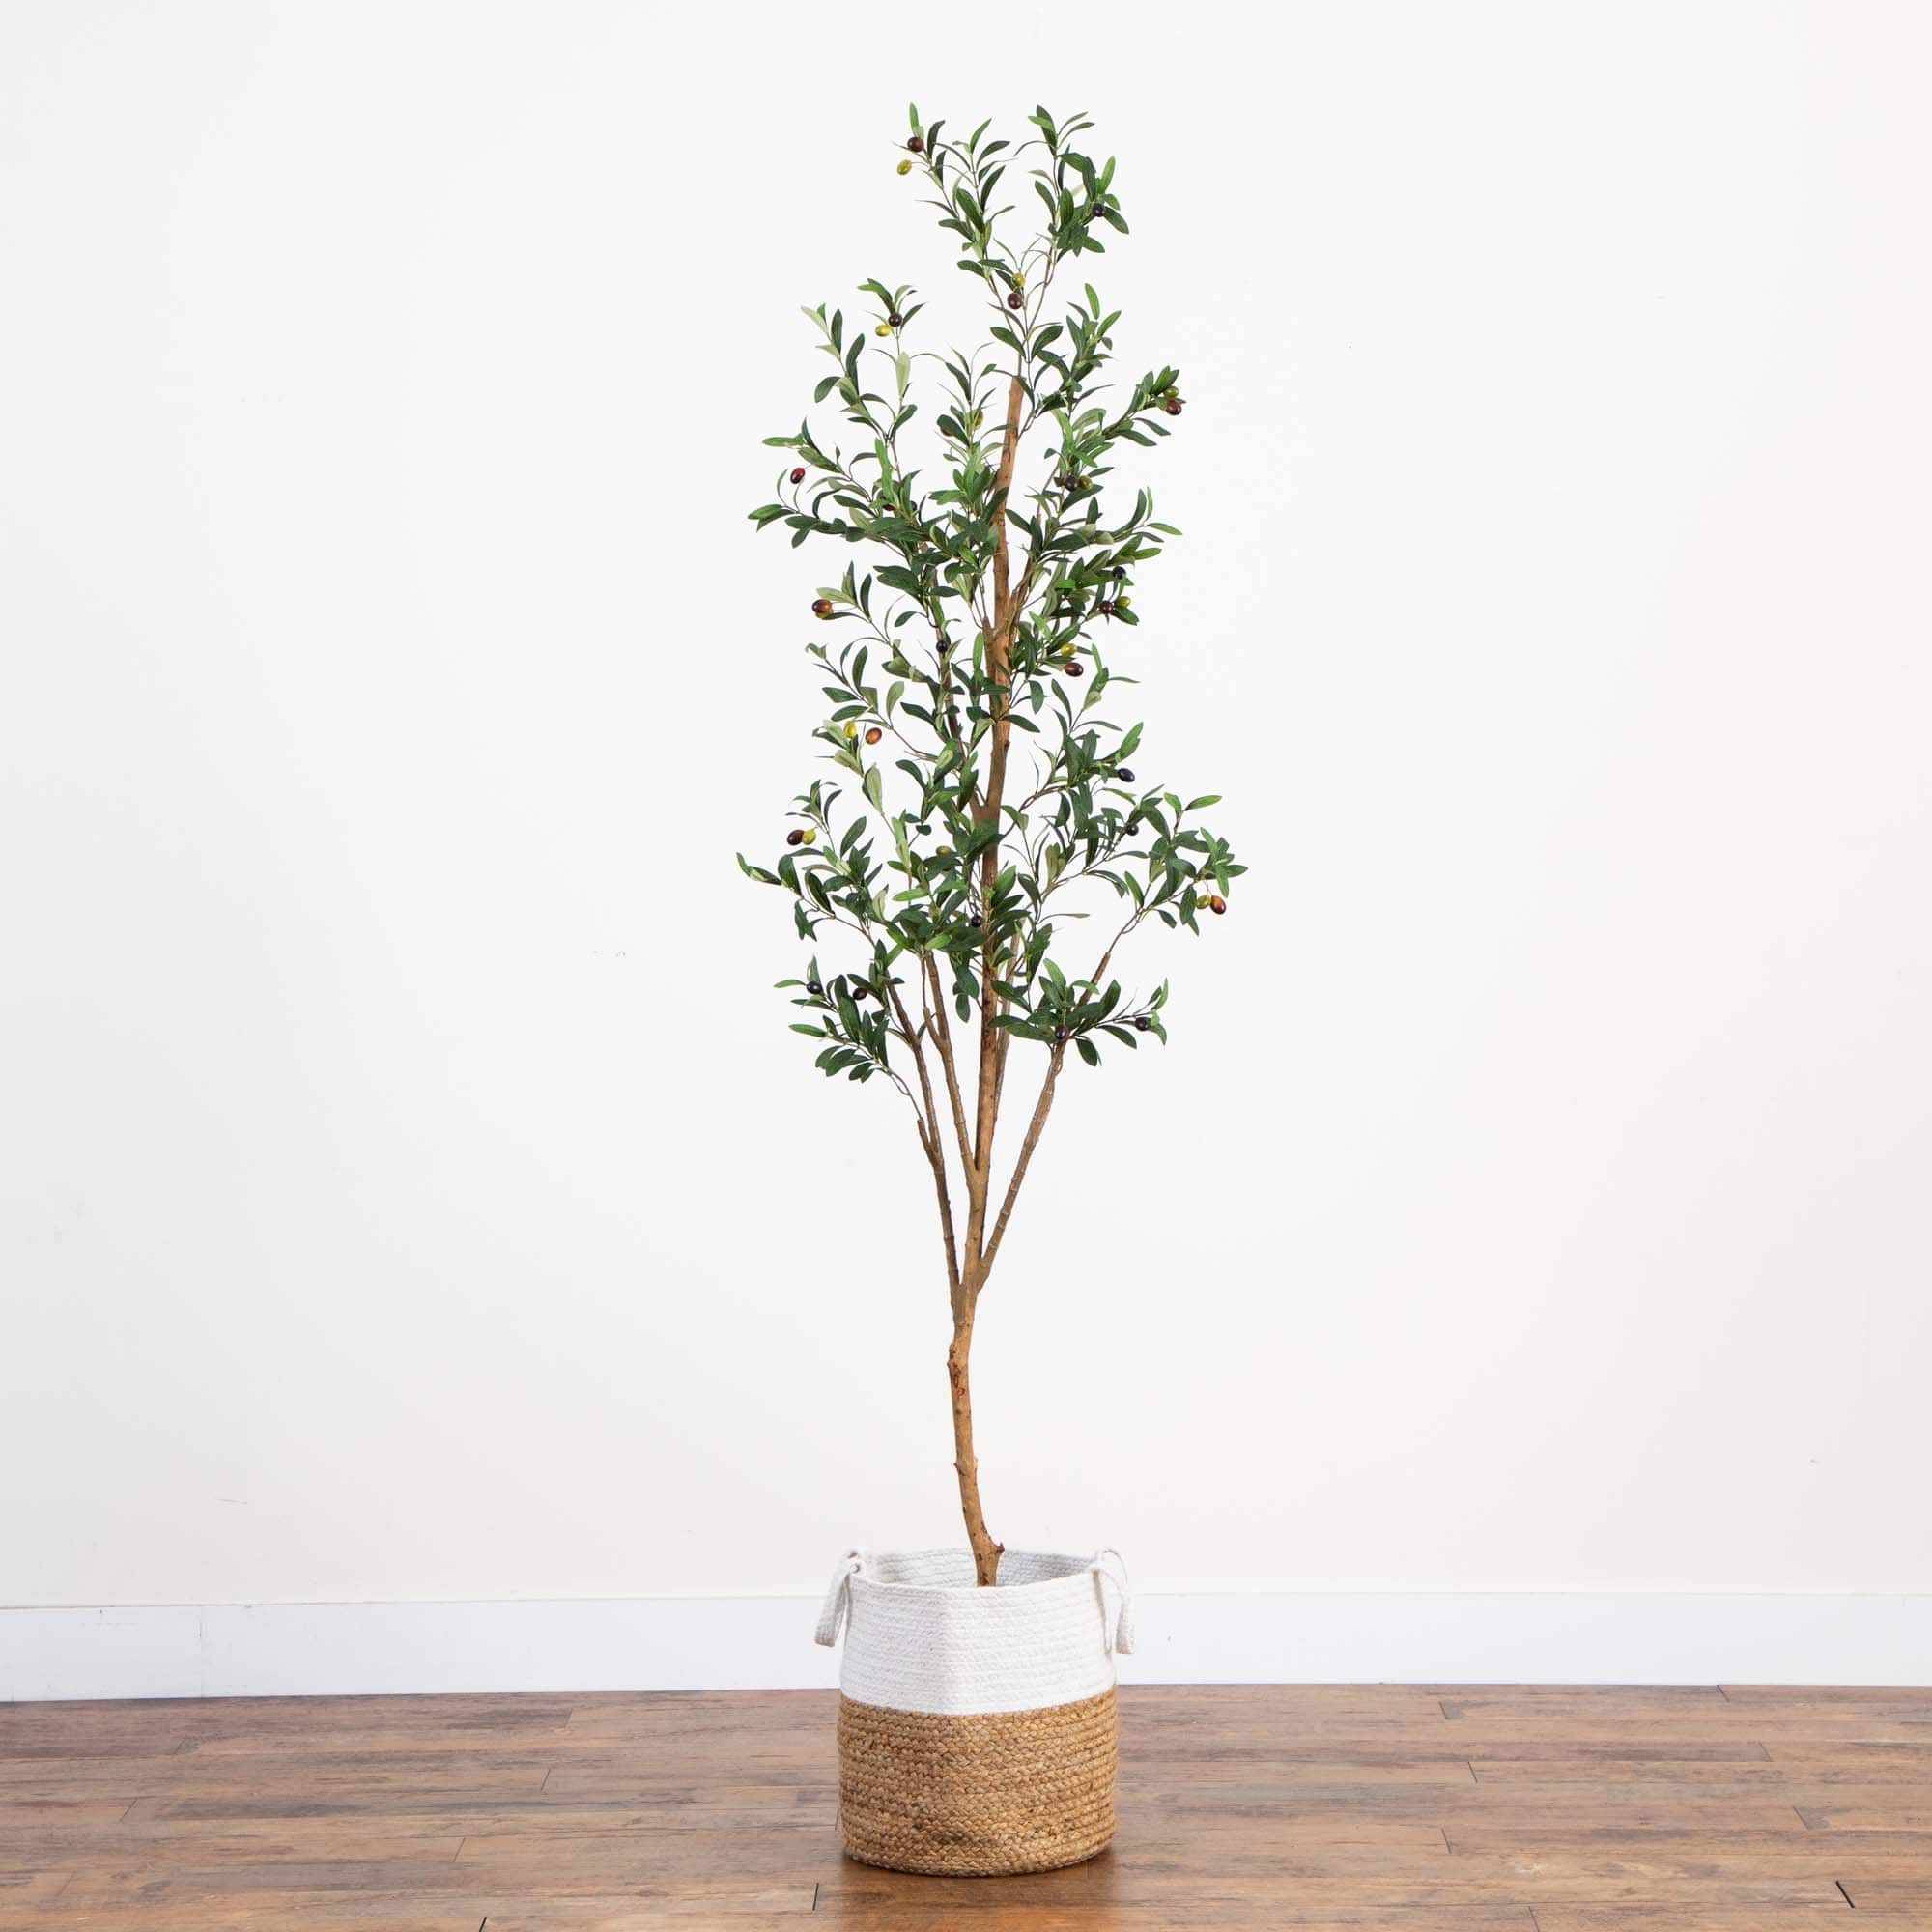 7ft. Olive Tree with Natural Trunk in Handmade Jute Basket